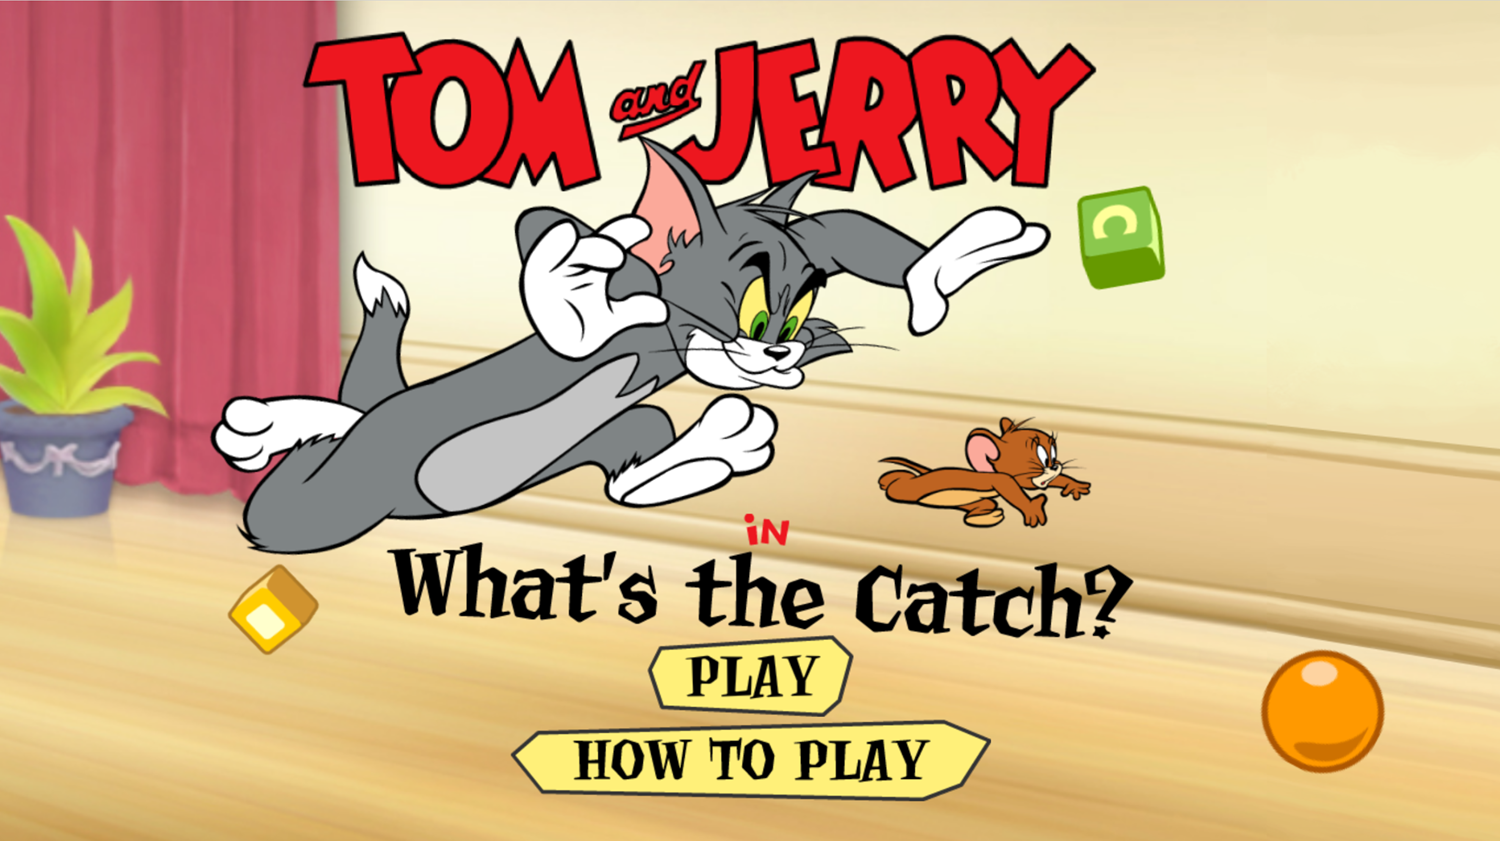 Tom and Jerry What's the Catch Welcome Screen Screenshot.